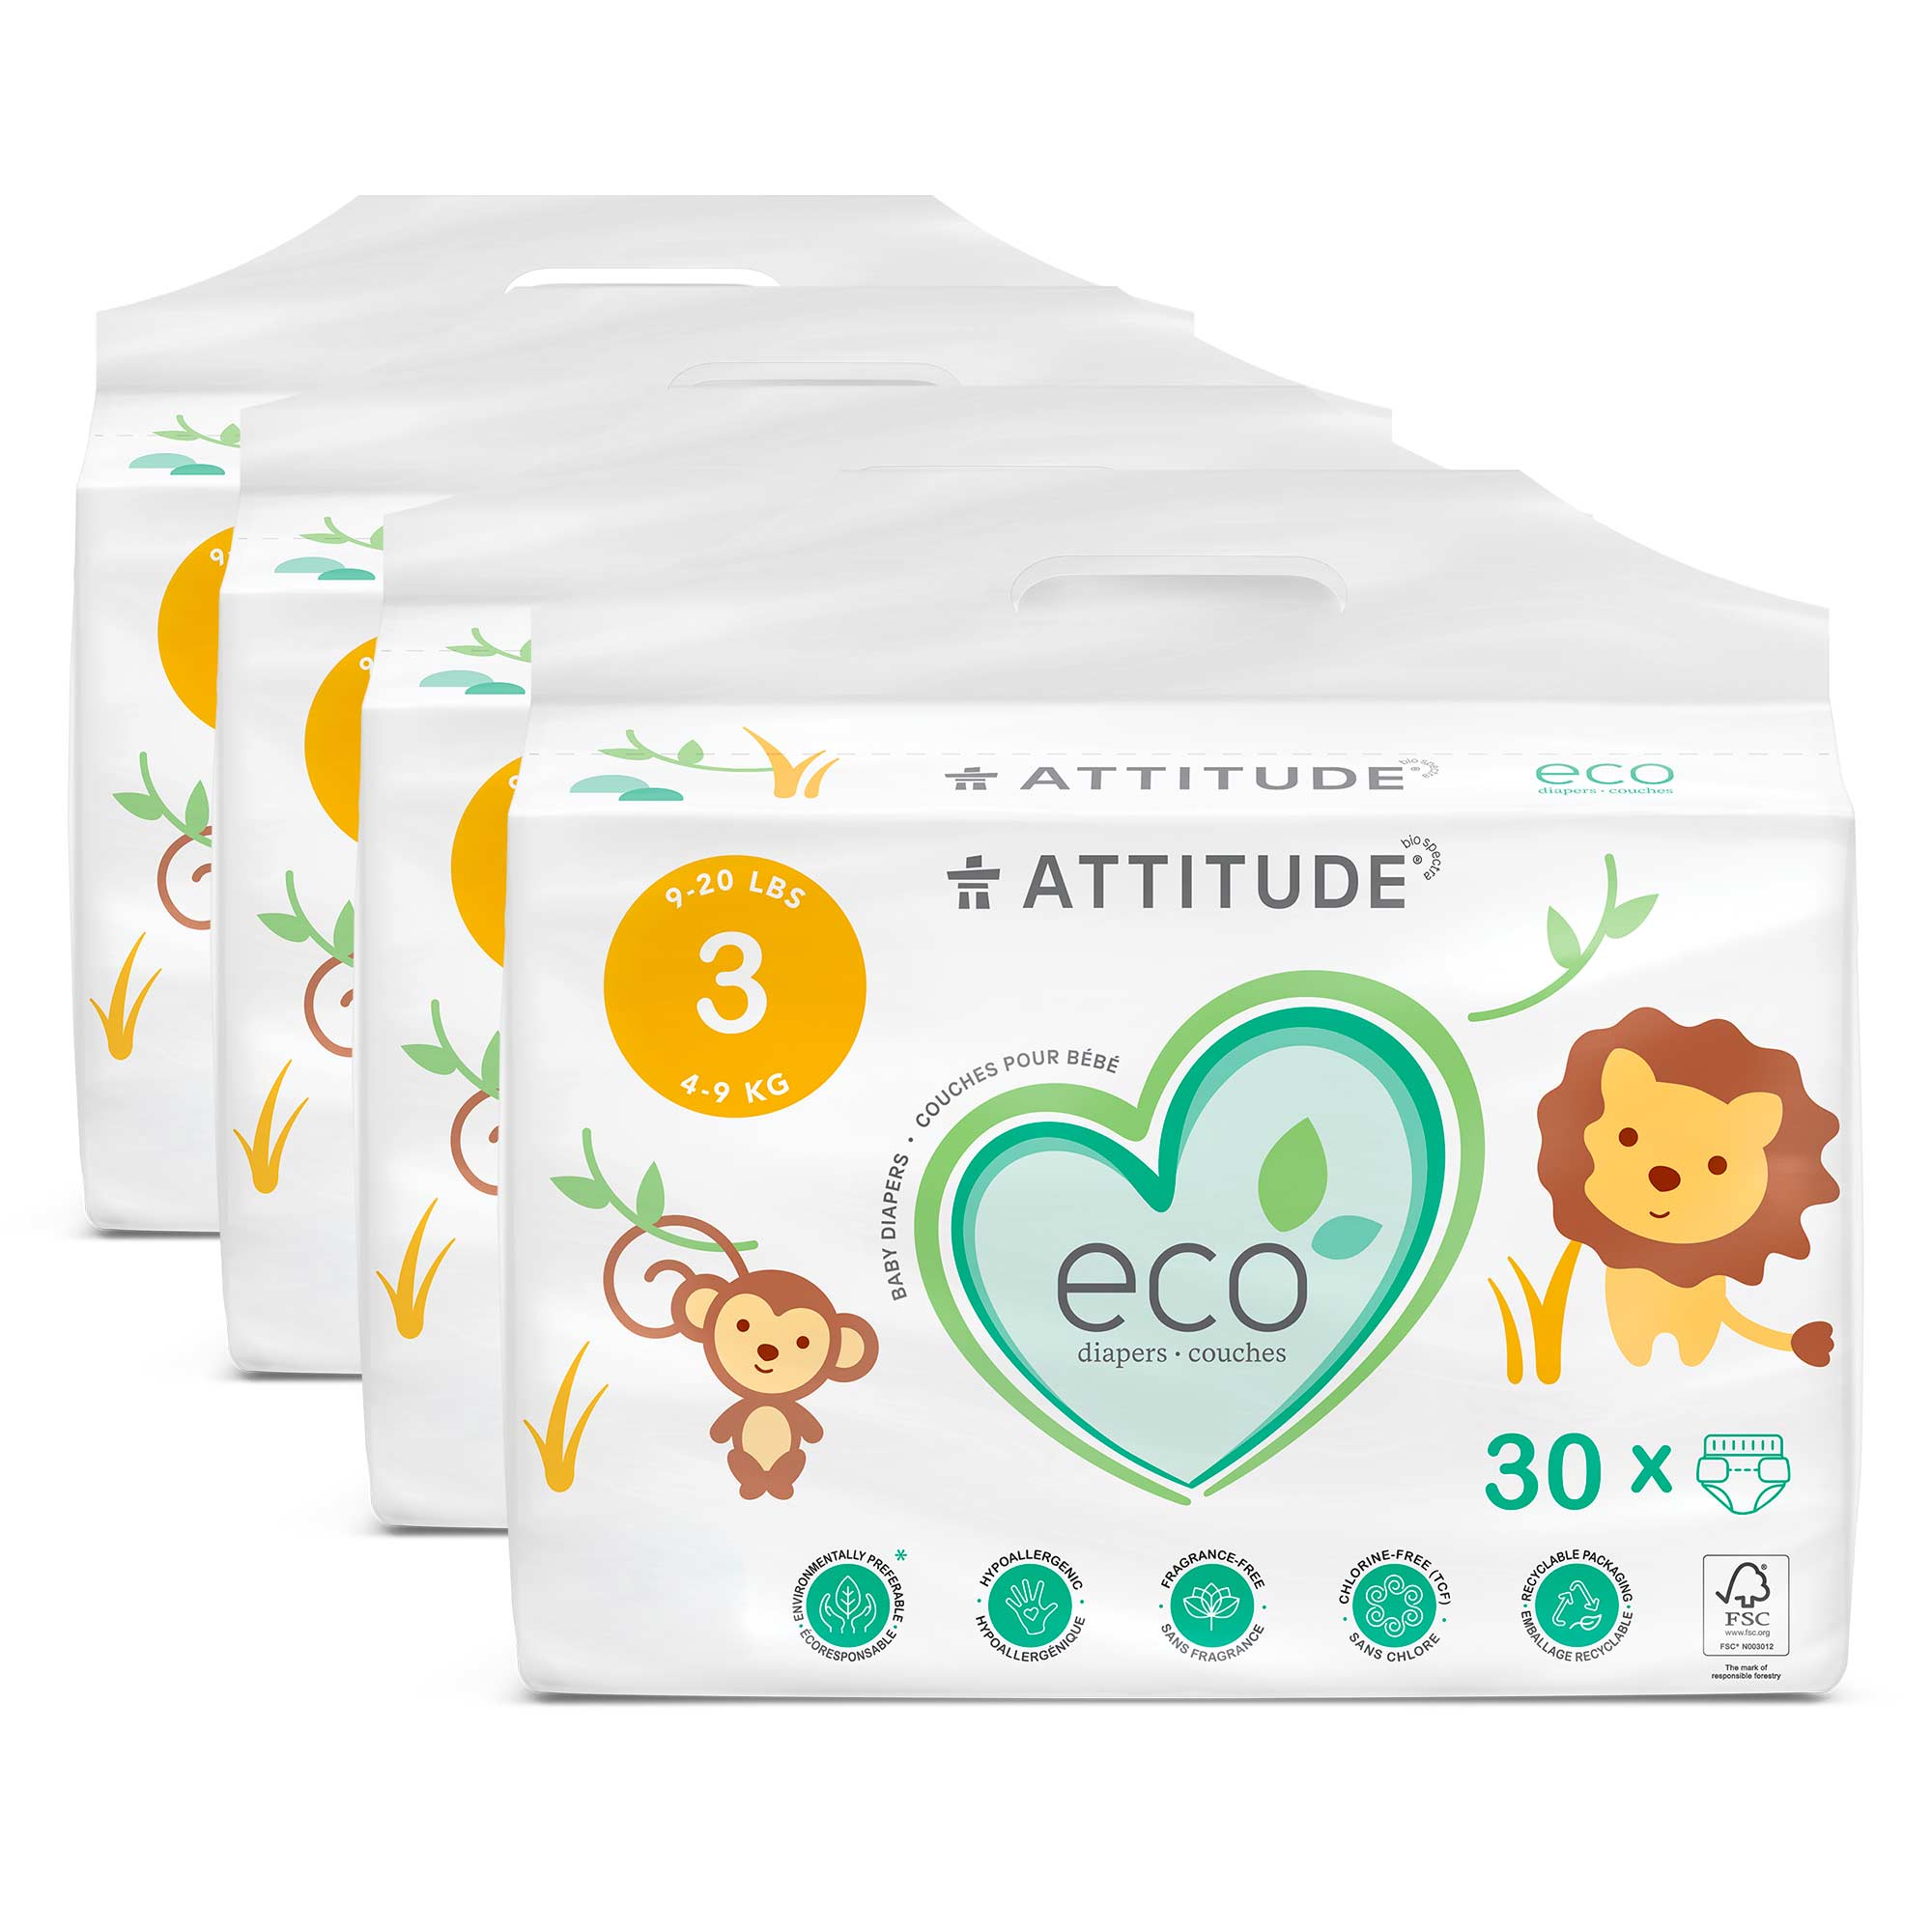 ATTITUDE Eco-friendly Biodegradable Diapers (size 3) - & Disposable BDL_4_16230_en?_main? Size 3 (Weight 9-20 lbs) / 4 units (5% discount)